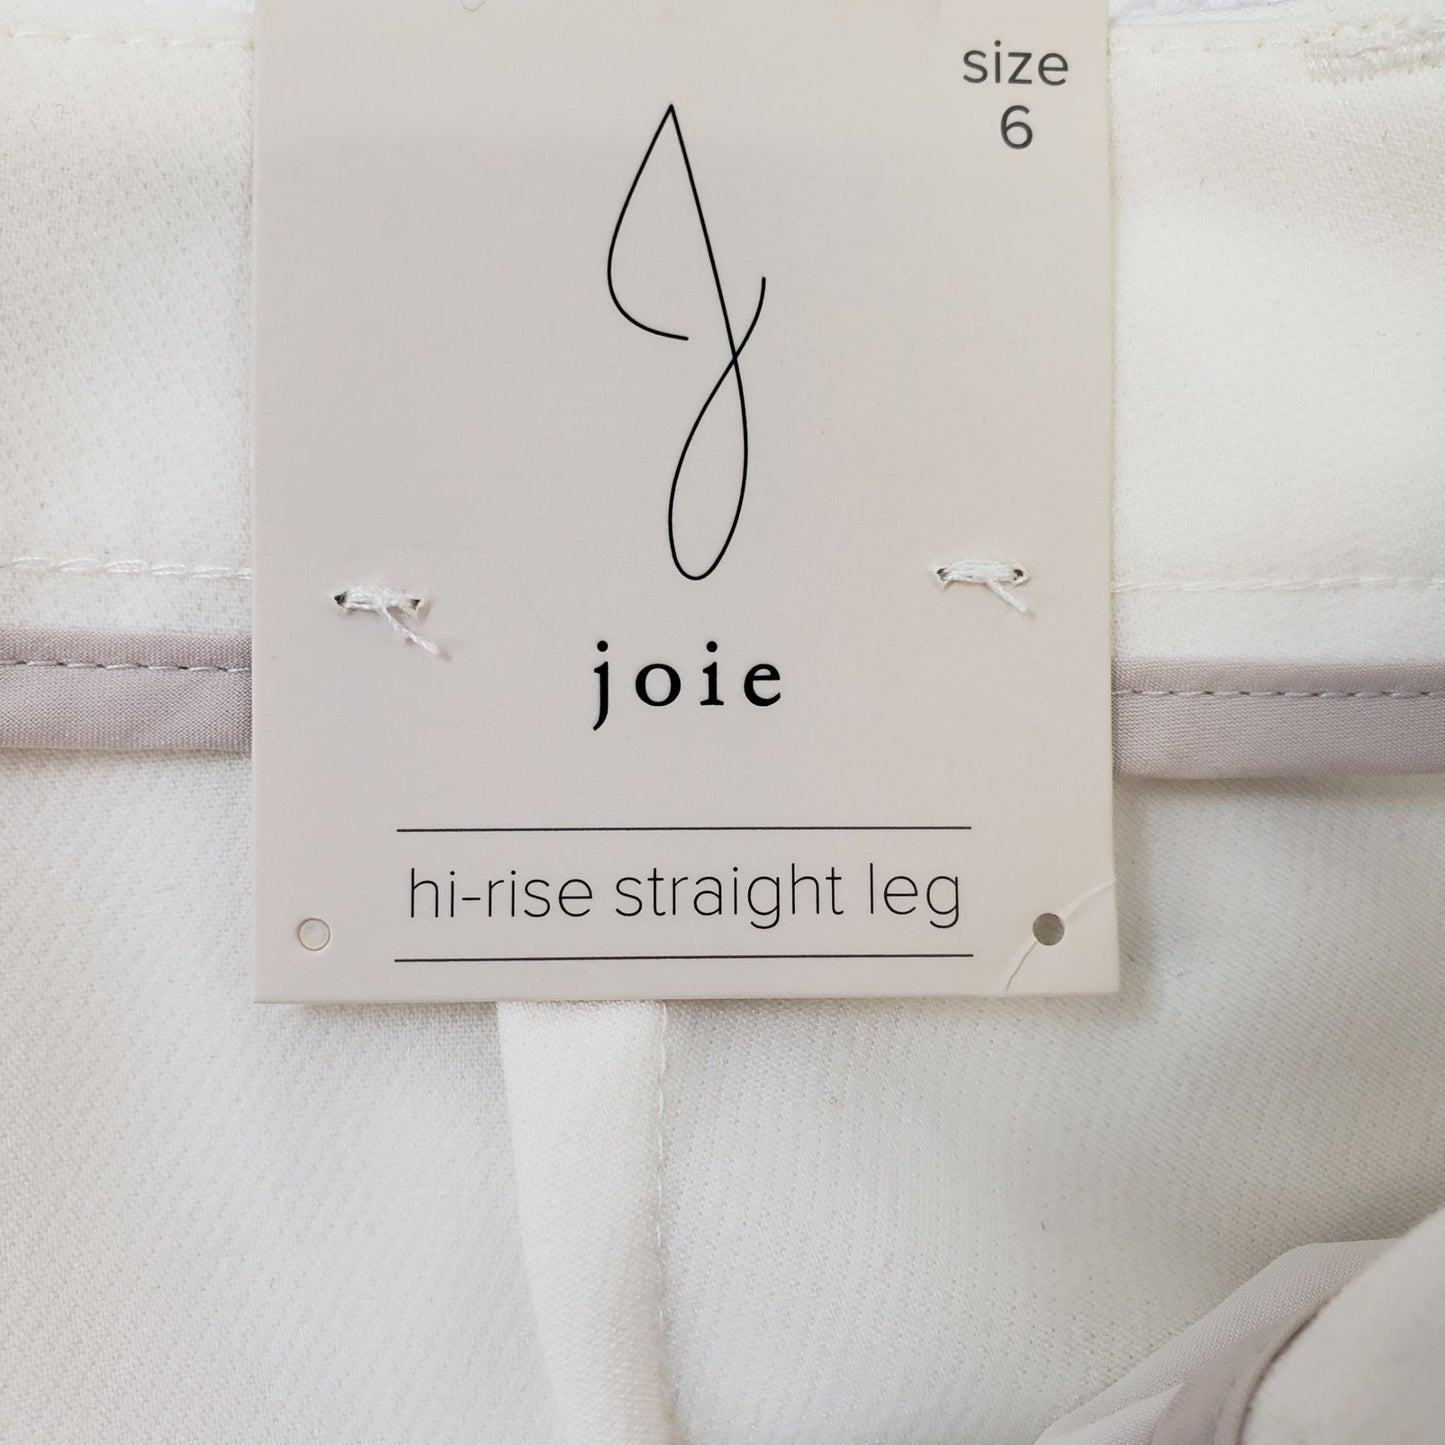 NWT Joie High Rise Straight Leg Trouser Pants Size 6